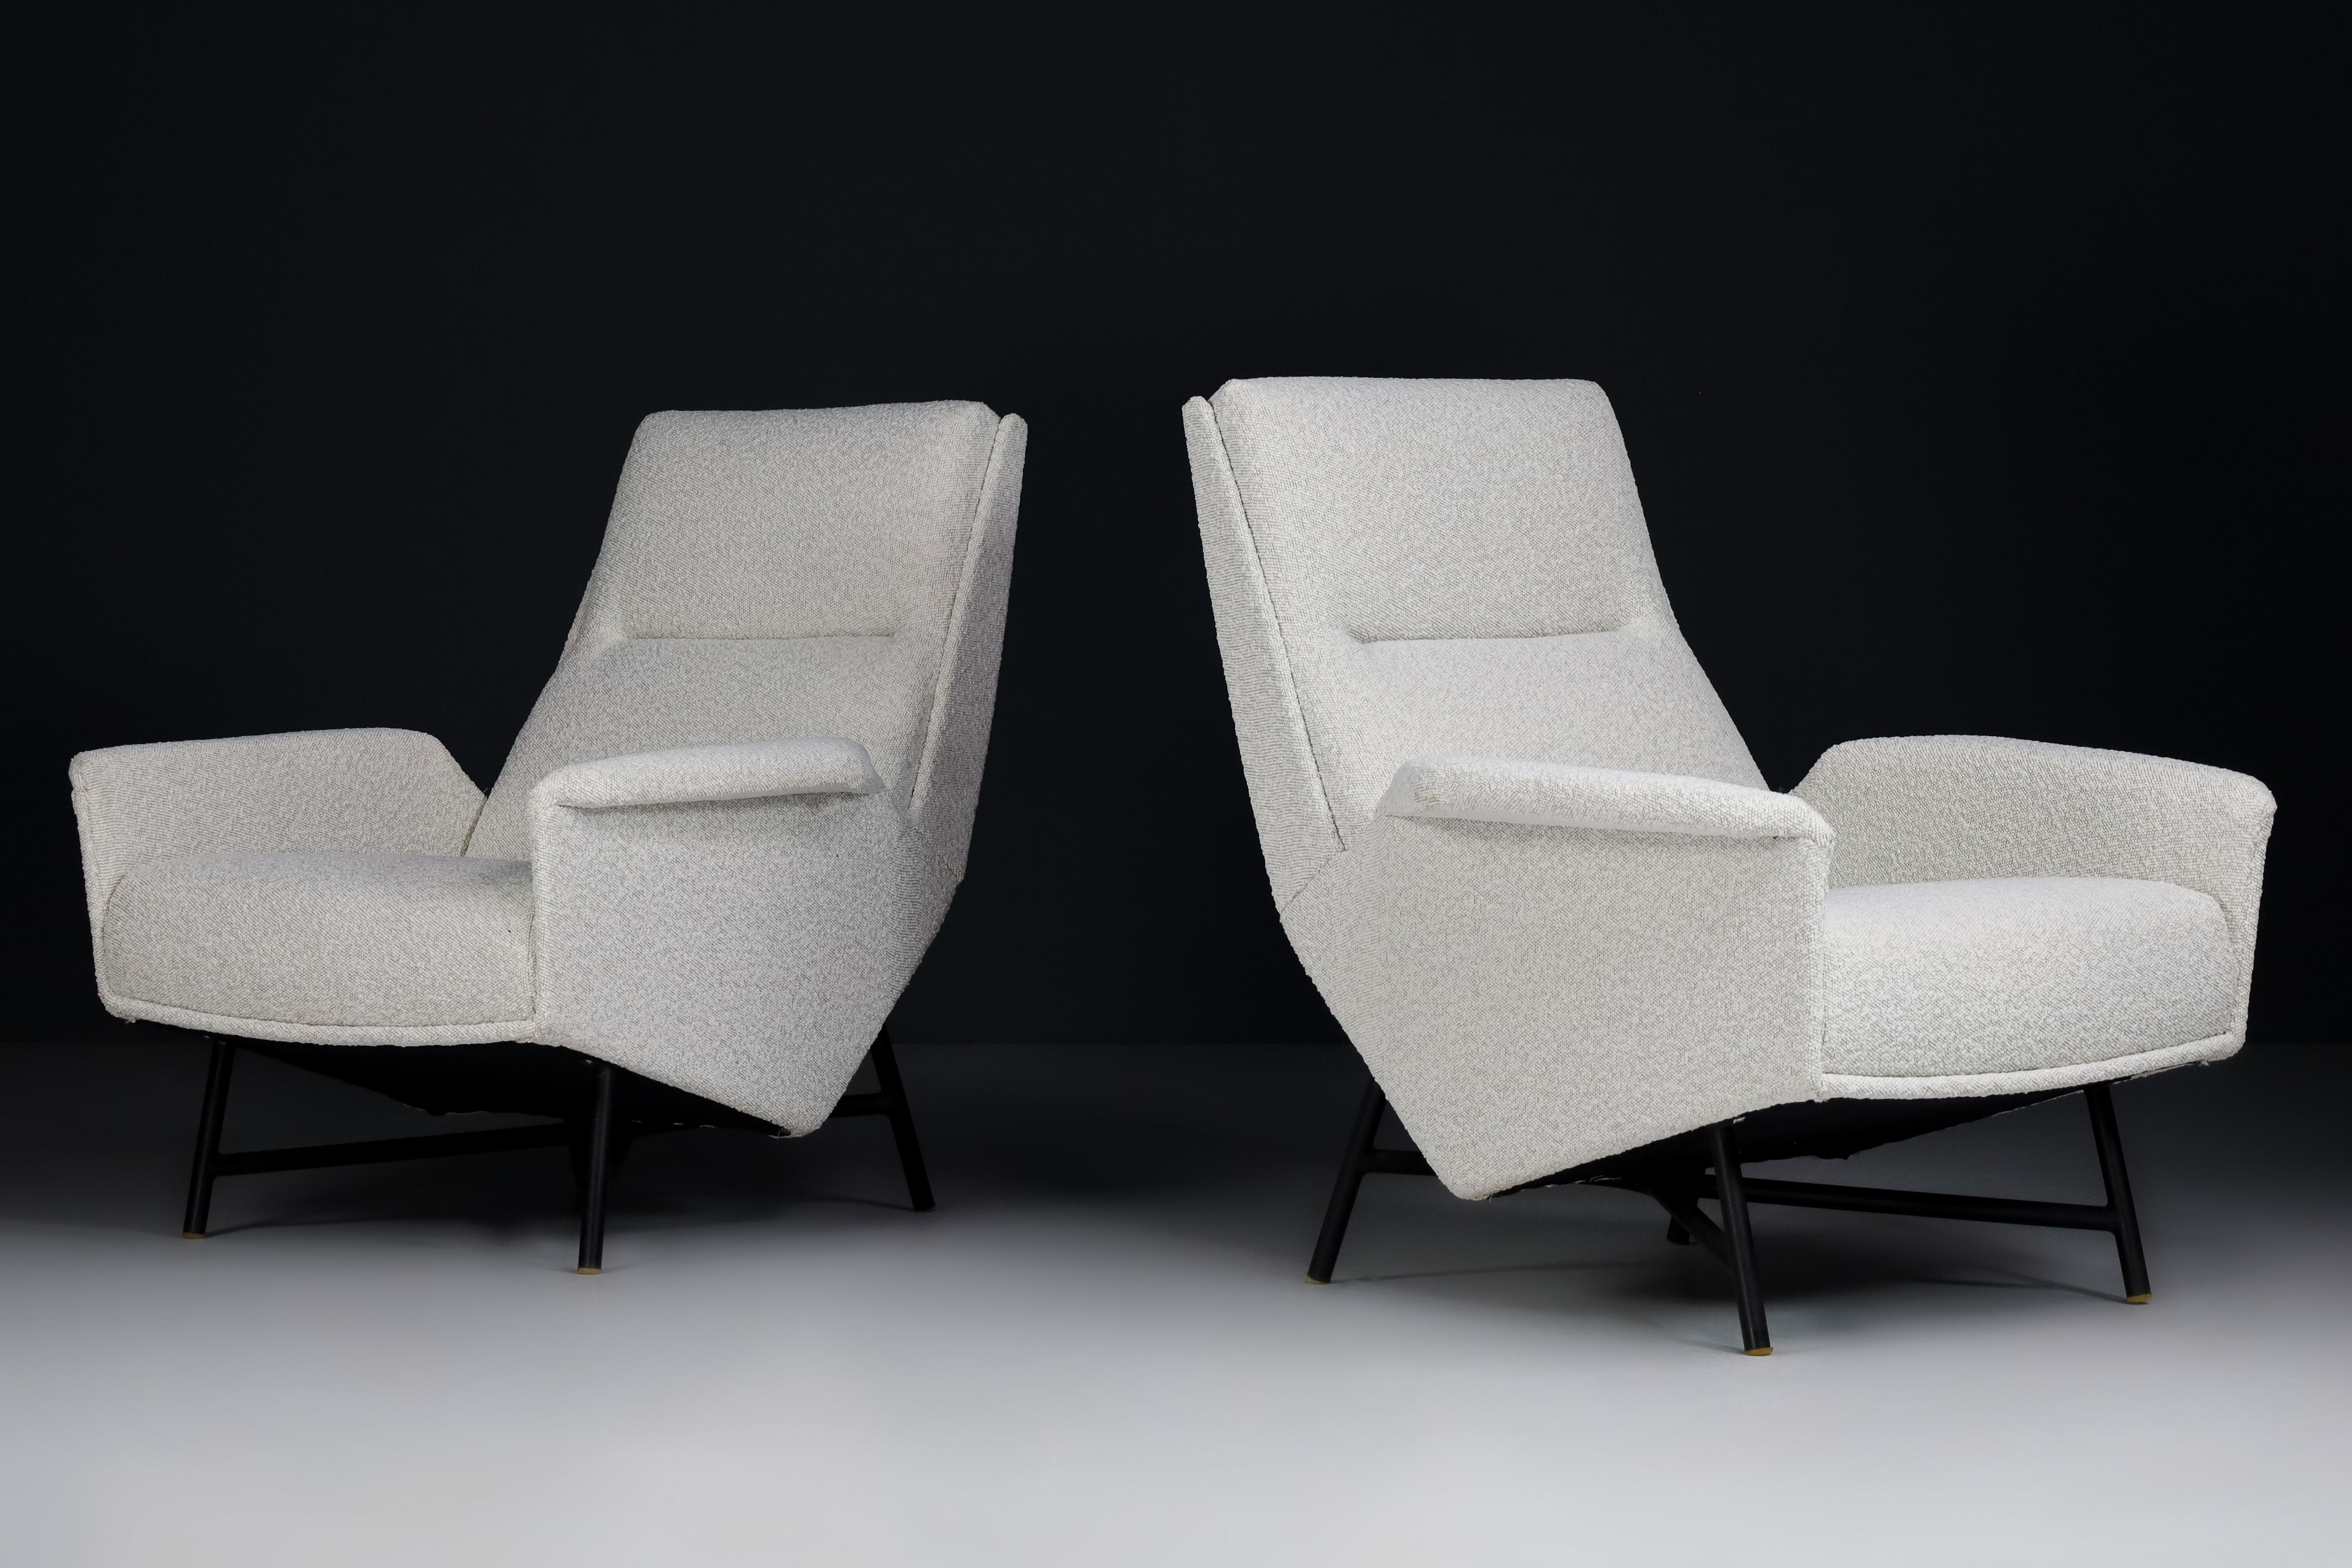 French Mid-Century Modern Lounge Chairs in Re-Upholstered Boucle by Guy Besnard, 1959 For Sale